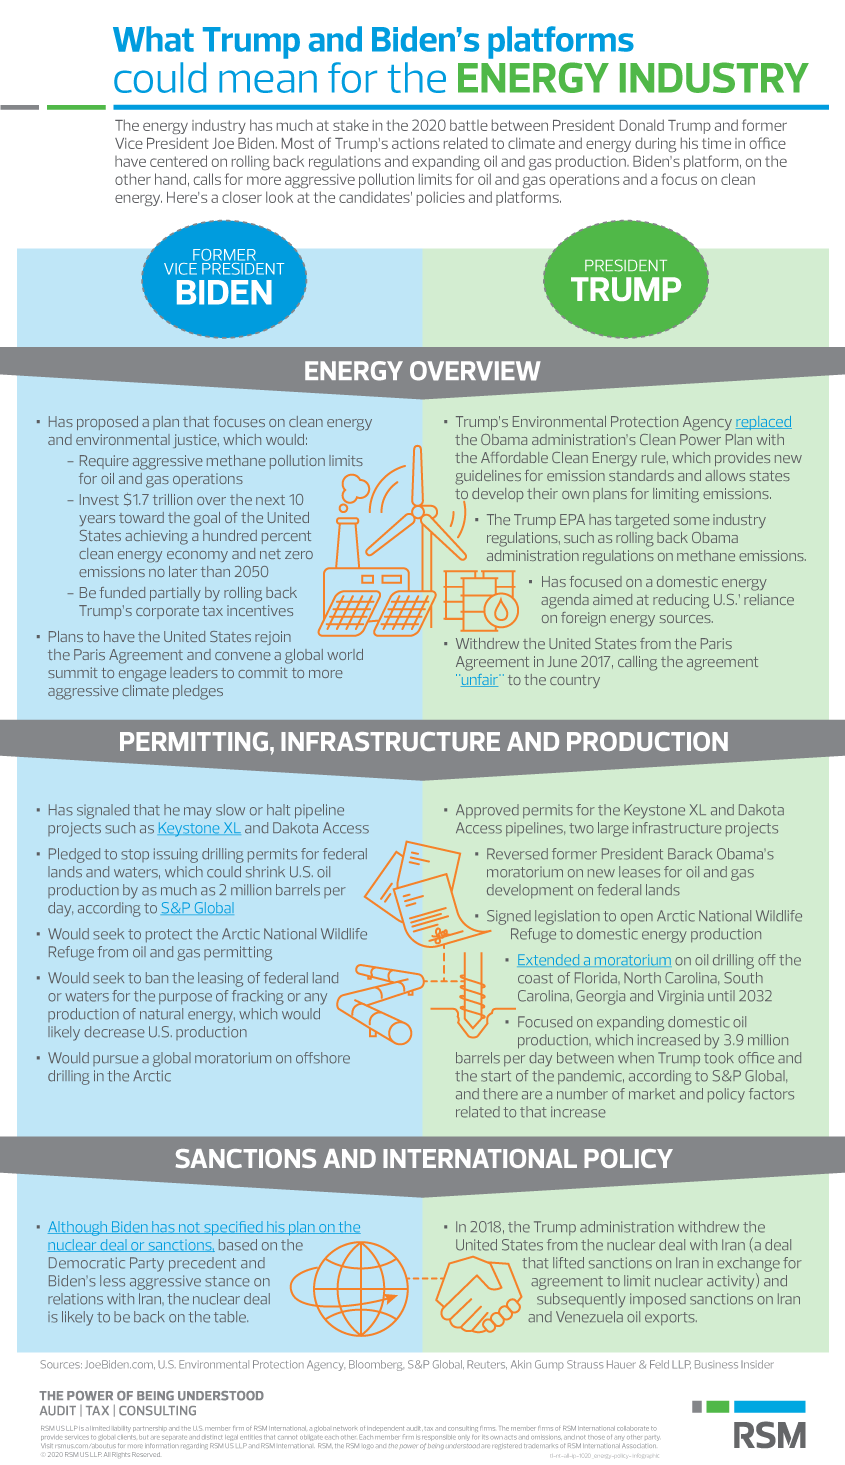 What Trump and Biden's platforms could mean for the energy industry Infographic 